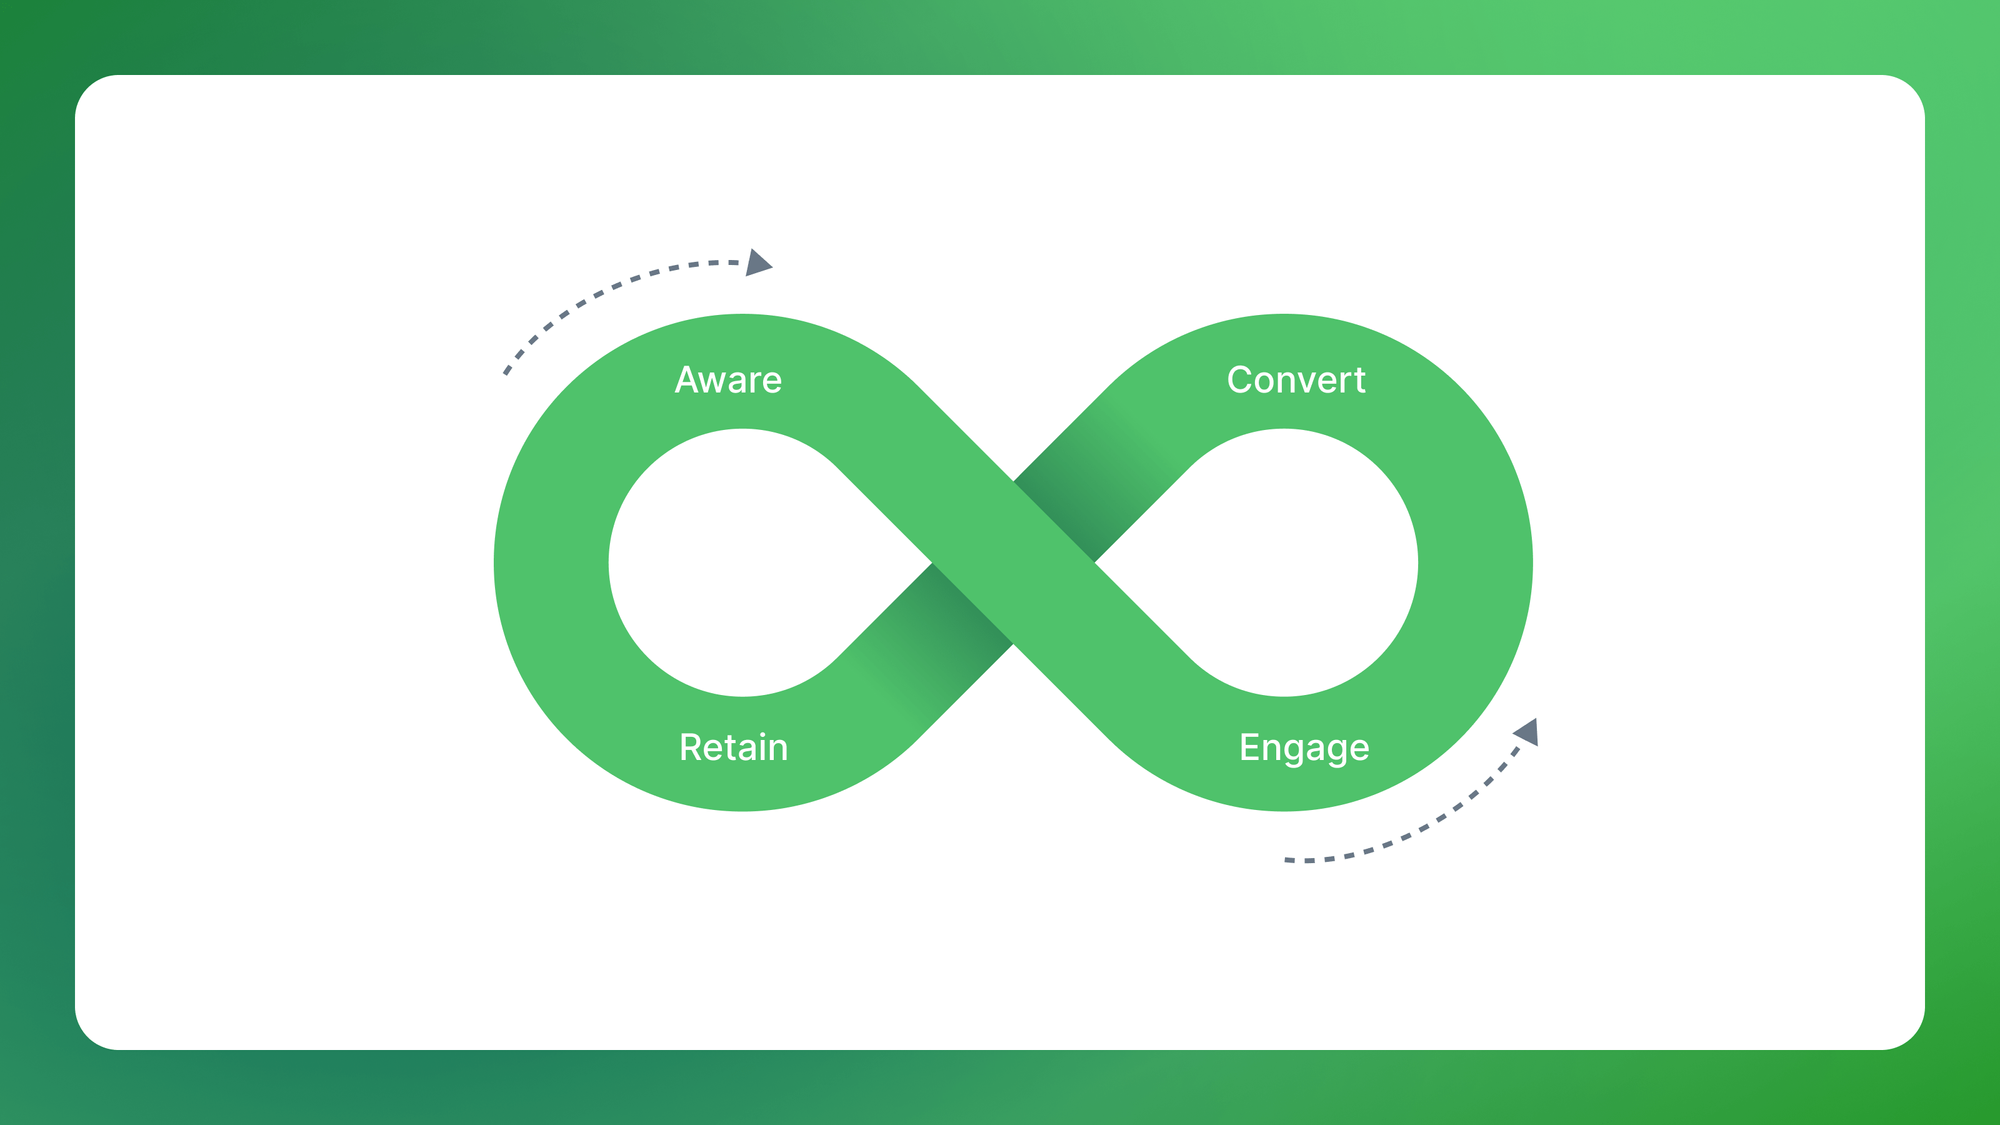 The 4 stages of lifecycle marketing